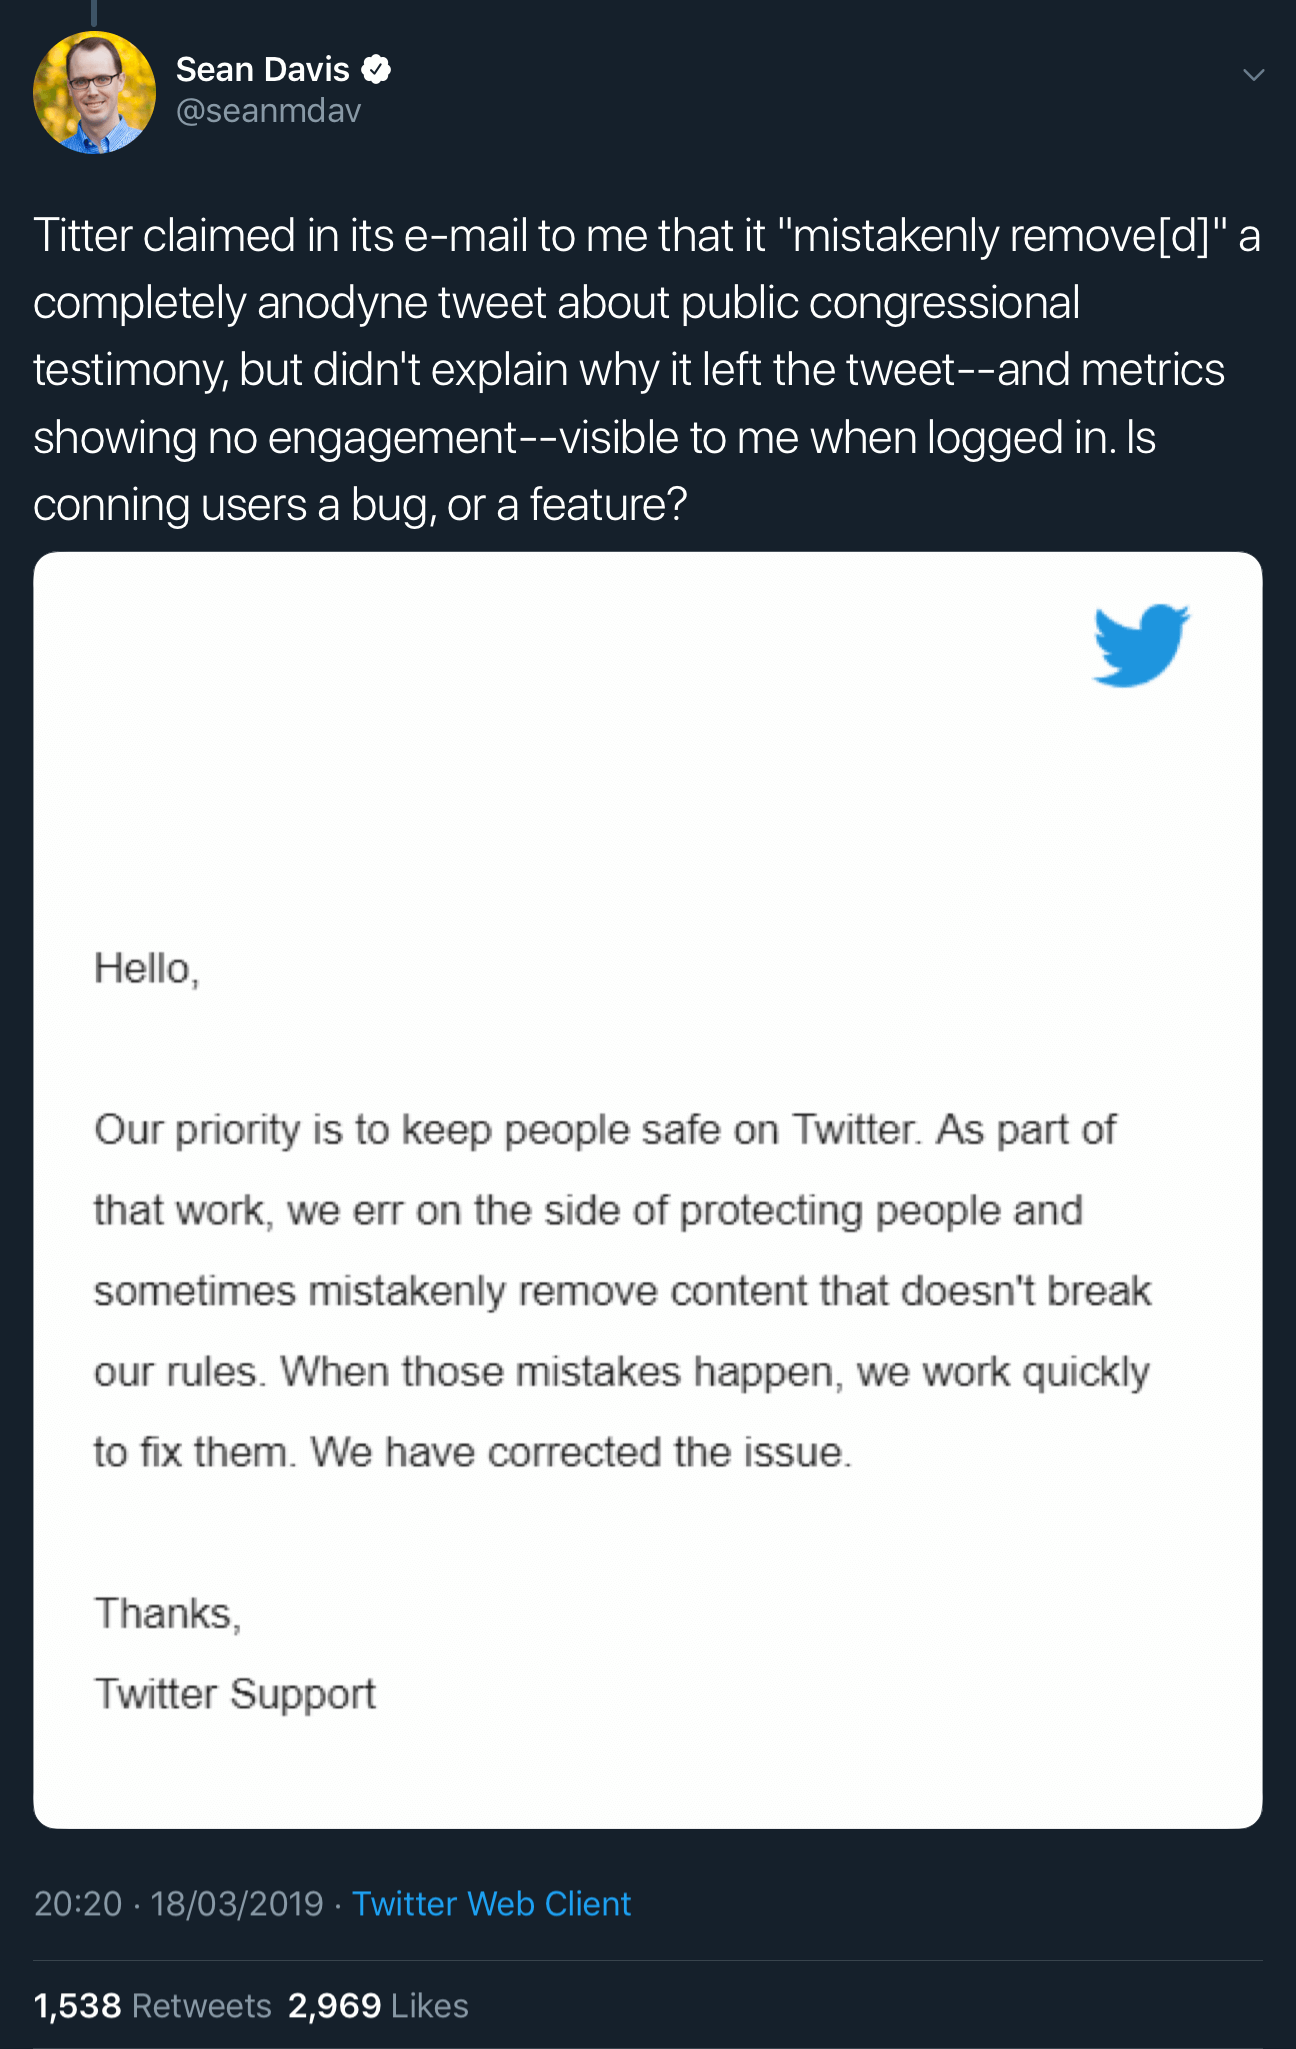 Sean Davis' tweet showing the email from Twitter which seems to confirm the shadowban.